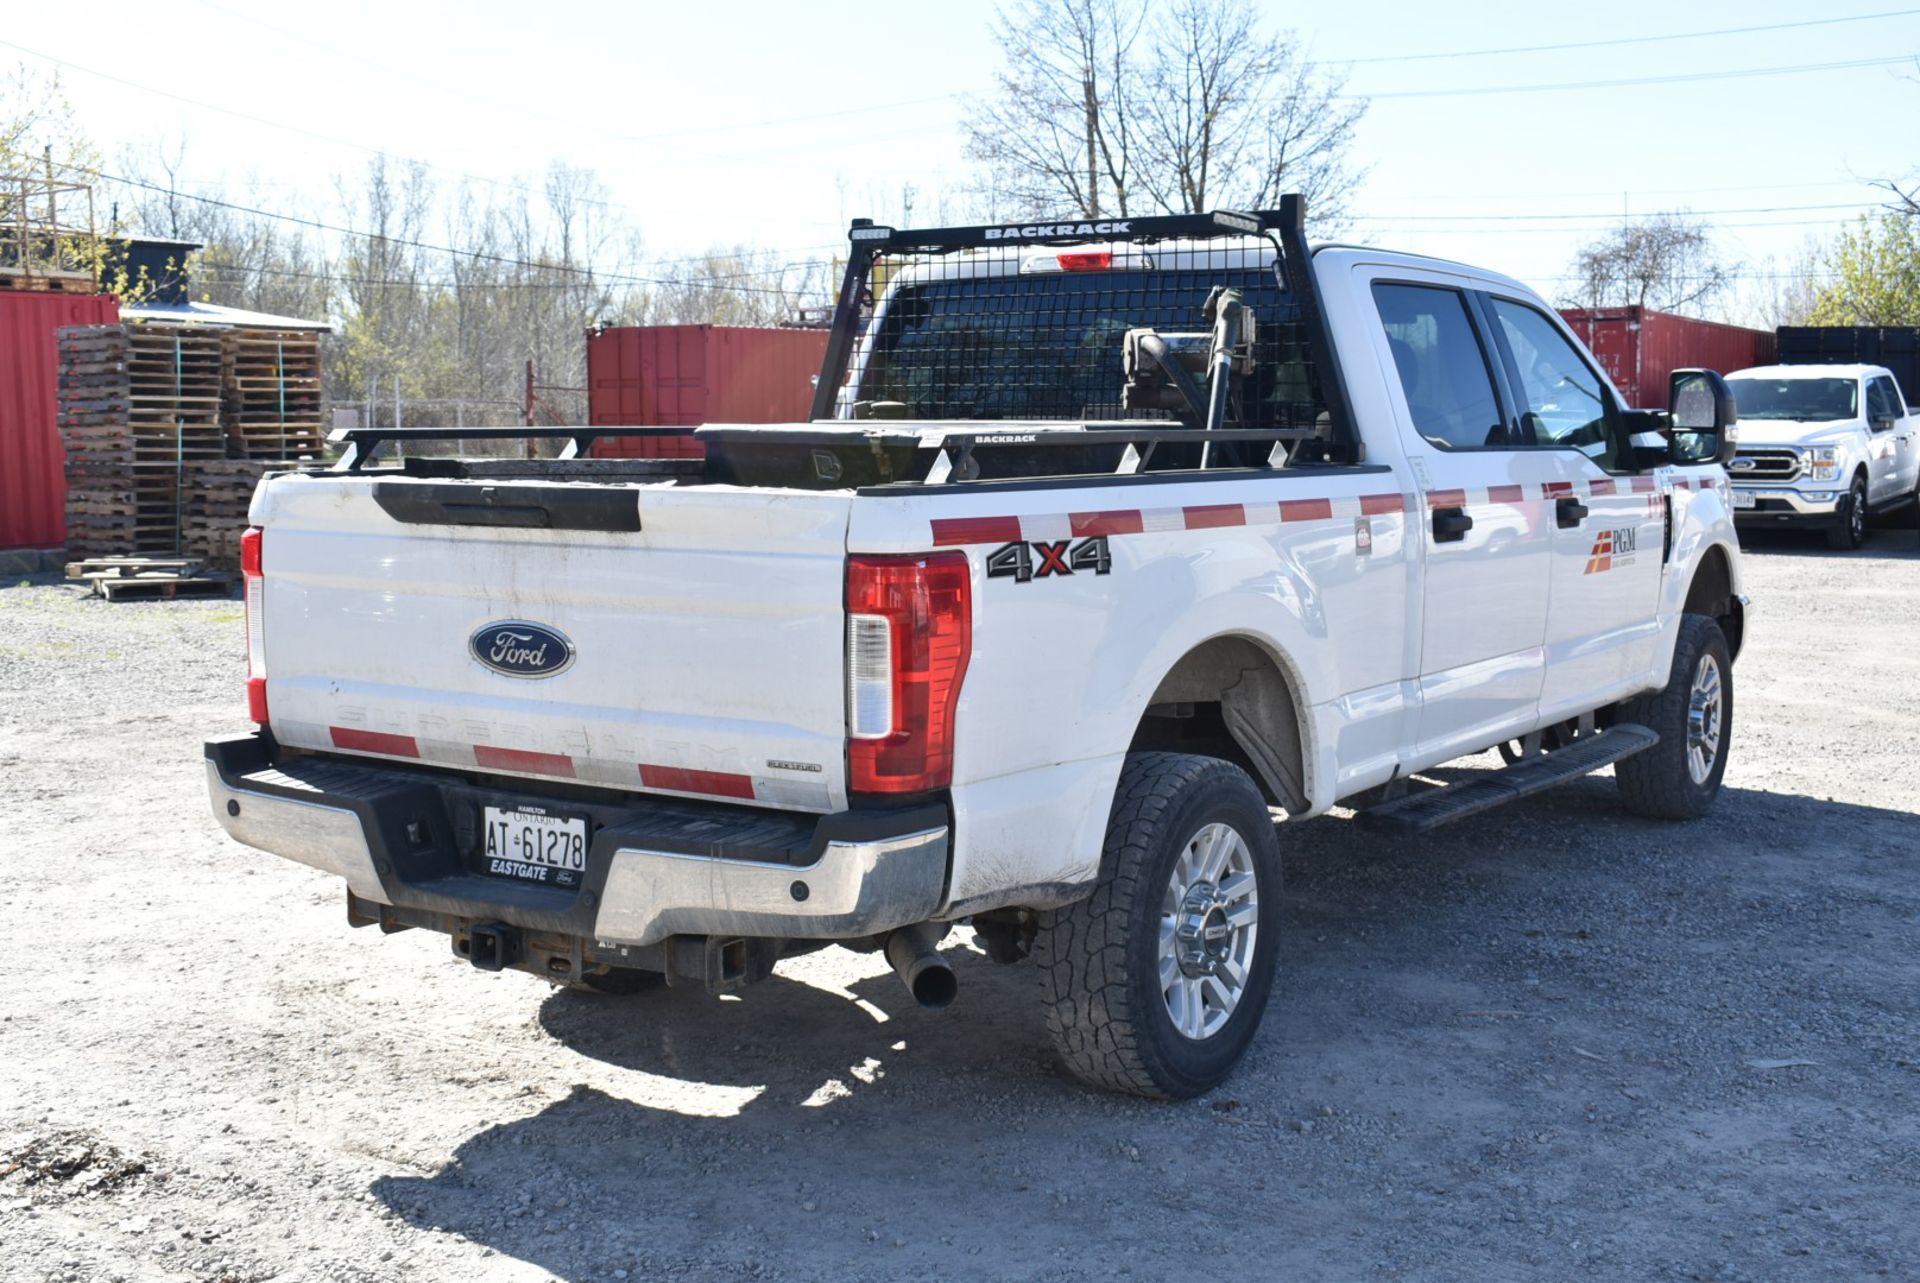 FORD (2017) F250 XLT SUPER DUTY CREW CAB PICKUP TRUCK WITH 6.2L 8 CYL. GAS ENGINE, AUTO. - Image 4 of 15